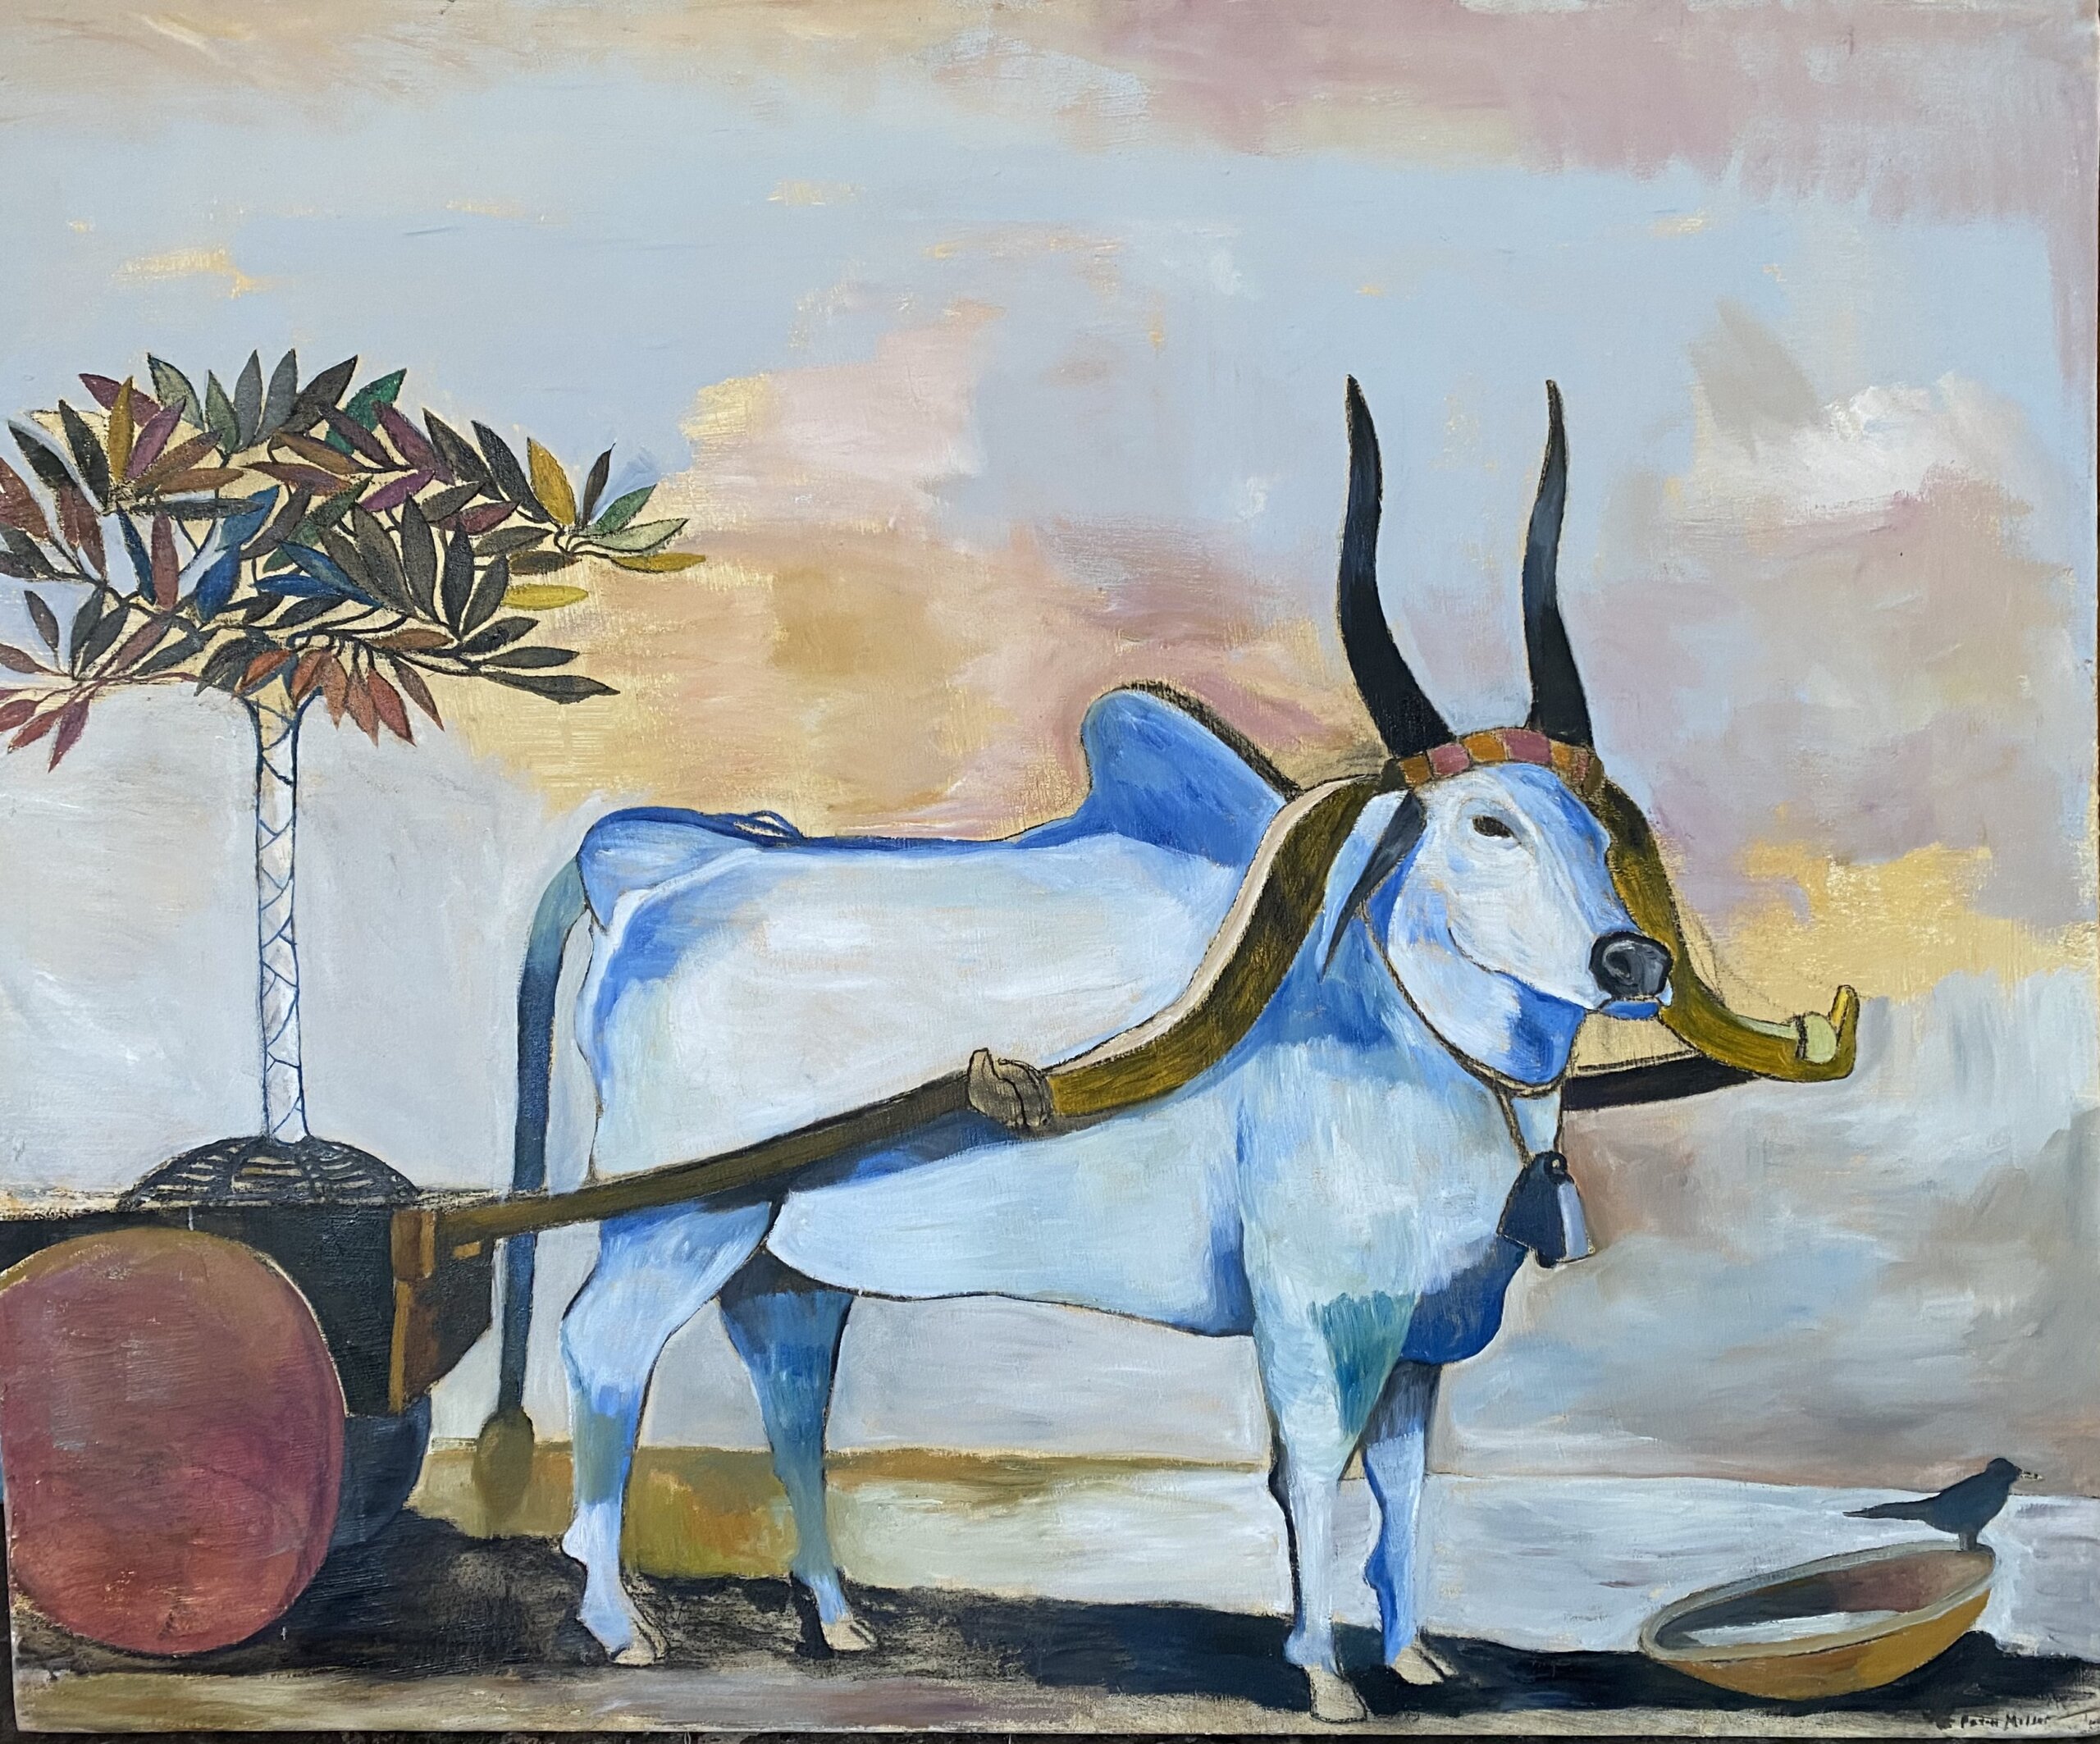 Paton Miller's "Oxen" (2022, private collection, oil, 59" x 56")